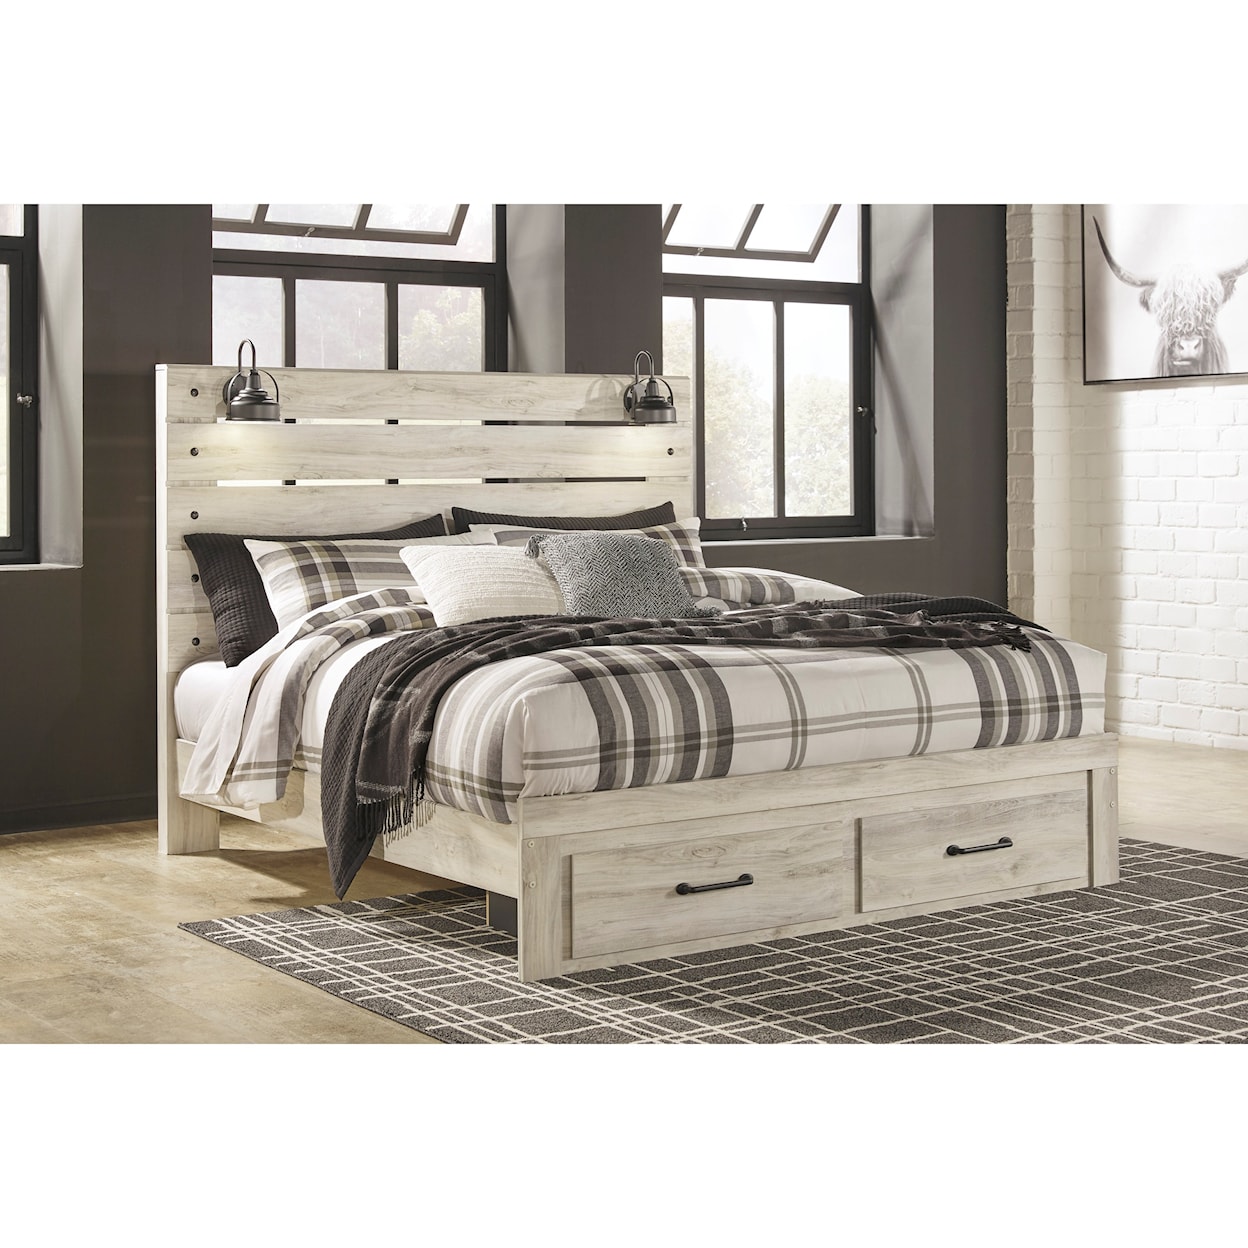 Michael Alan Select Cambeck King Bed w/ Lights & Footboard Drawers